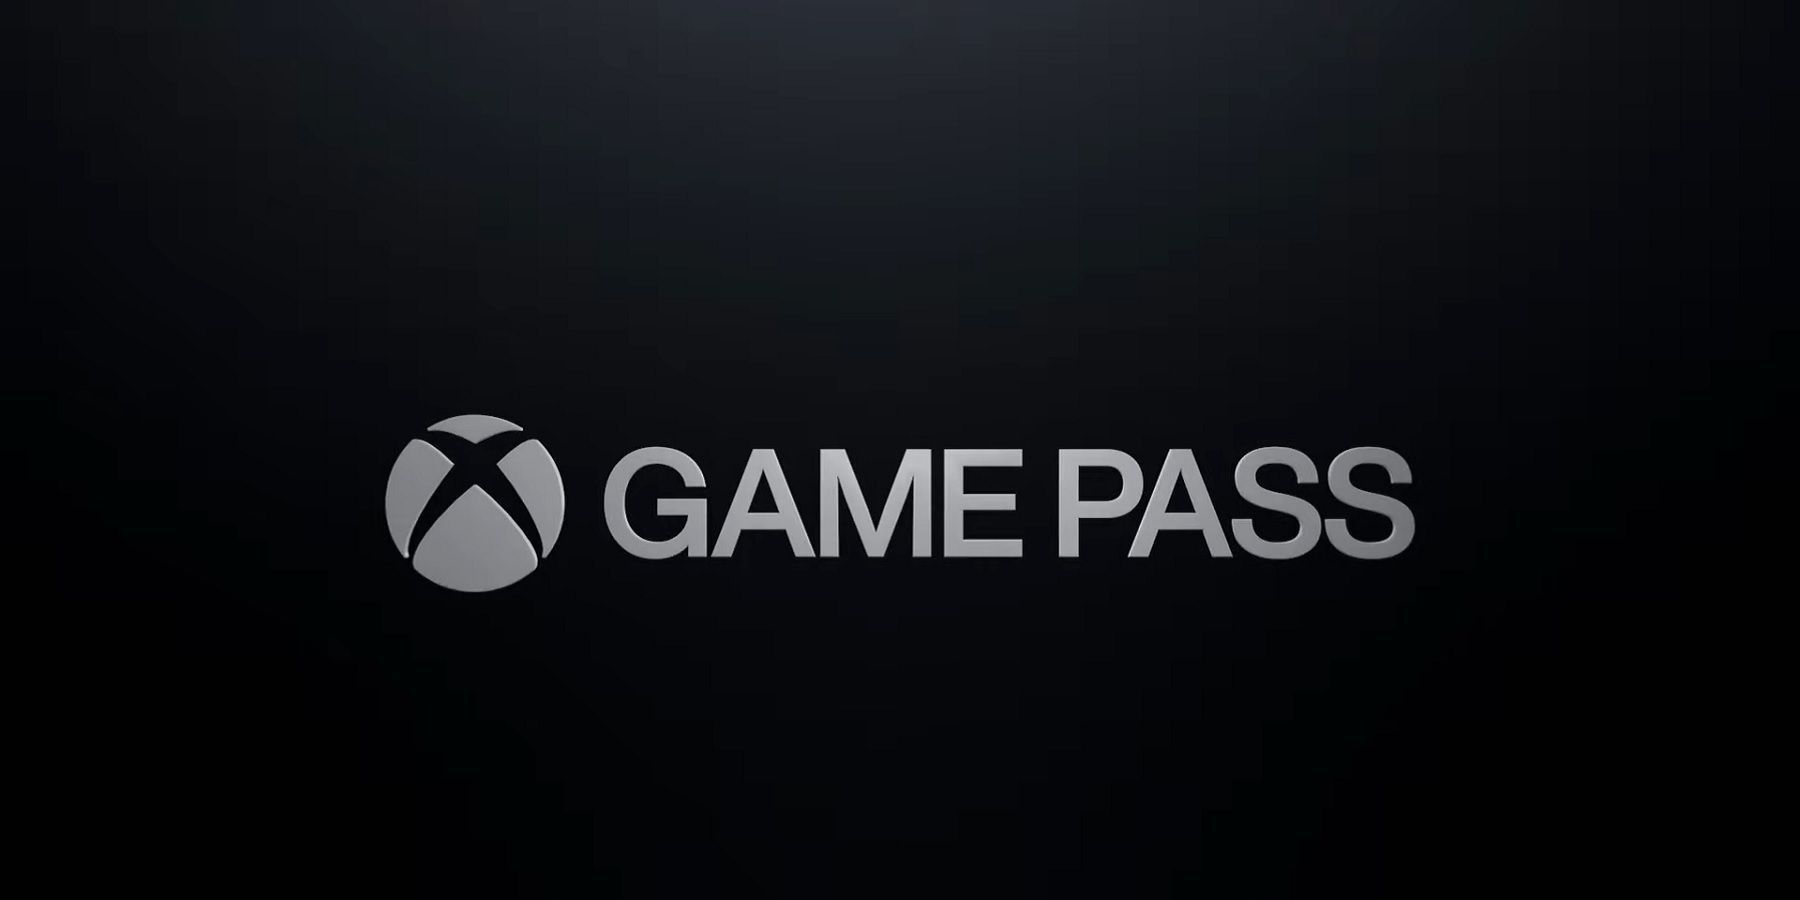 Xbox Game Pass list for September expanded with five more titles including Payday  3